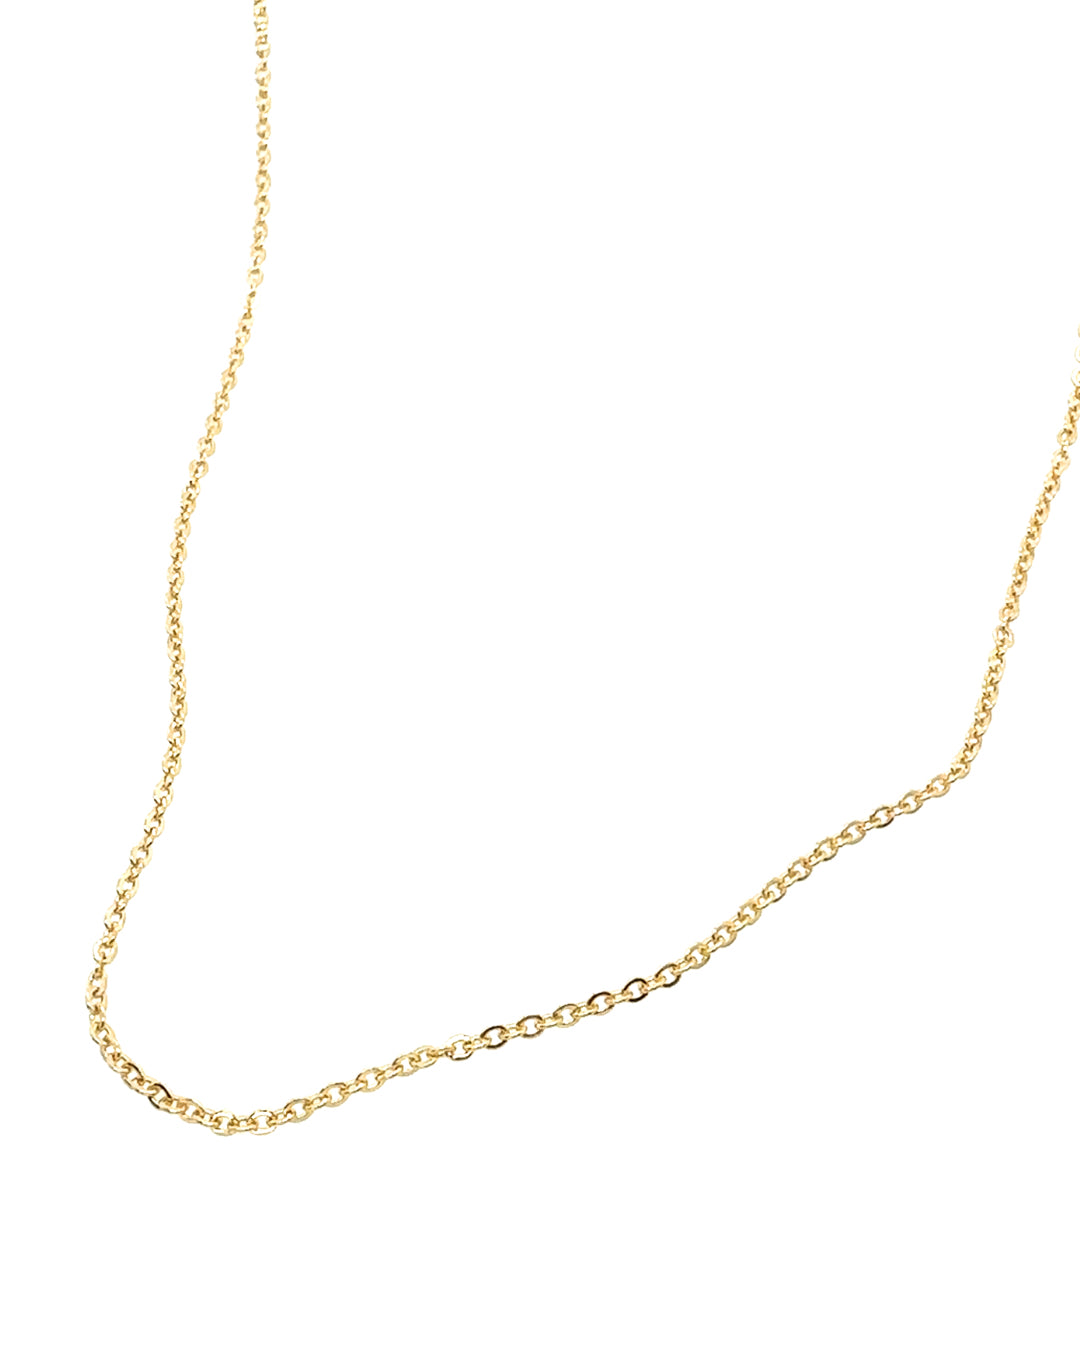 14k yellow gold fill cable chain necklace 